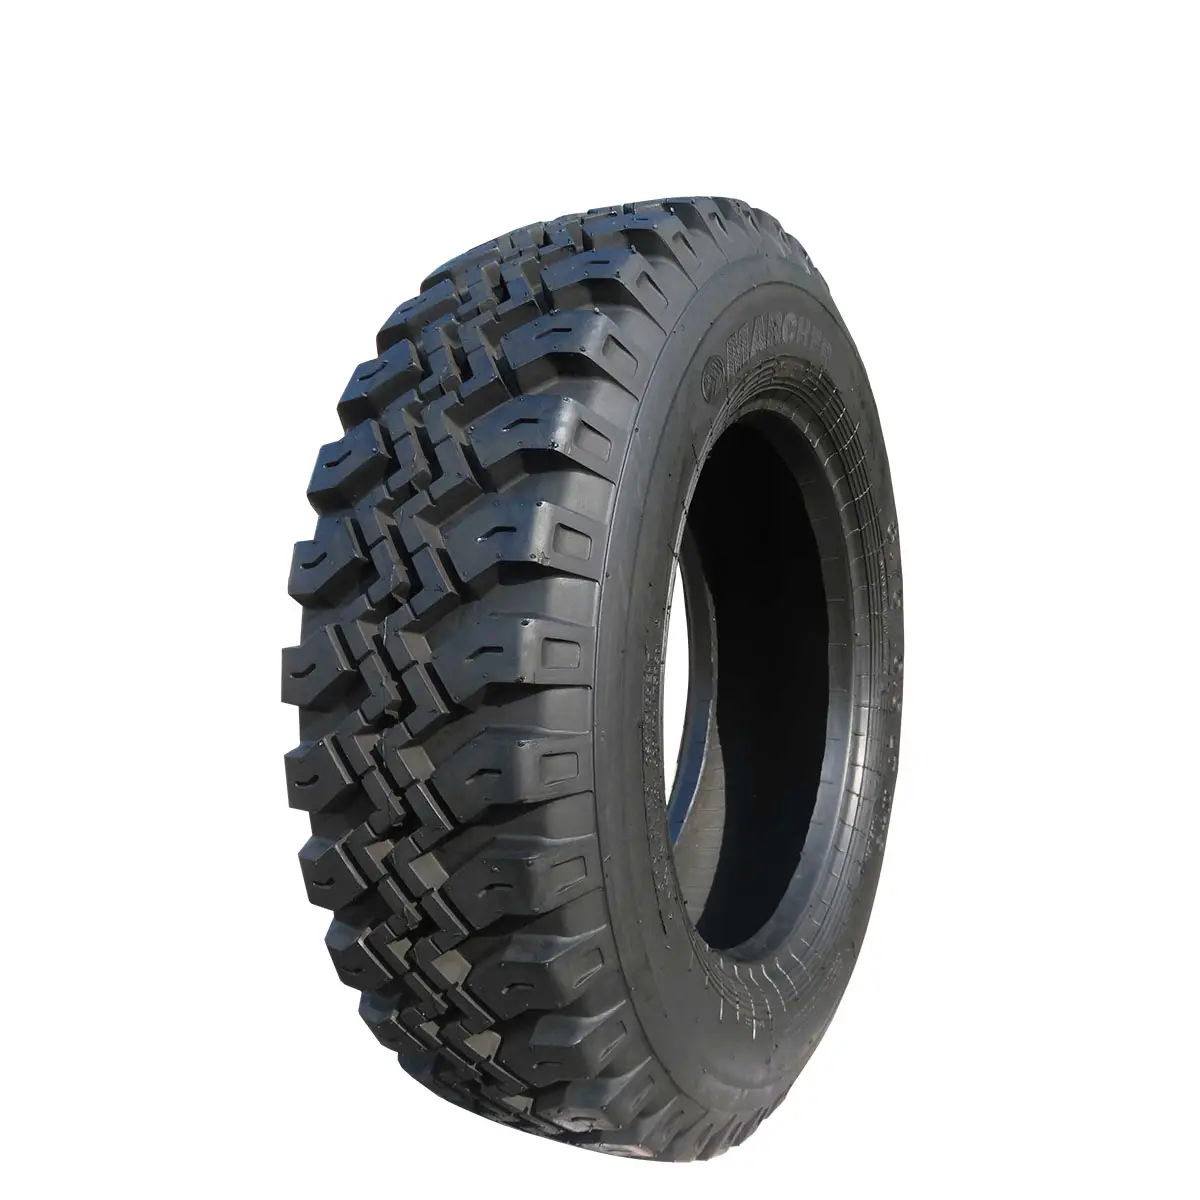 MARCHER brand tyre 8.00-16.5, 7.50-16, 8.75-16.5 for GSE equipment baggage airport tow tractor